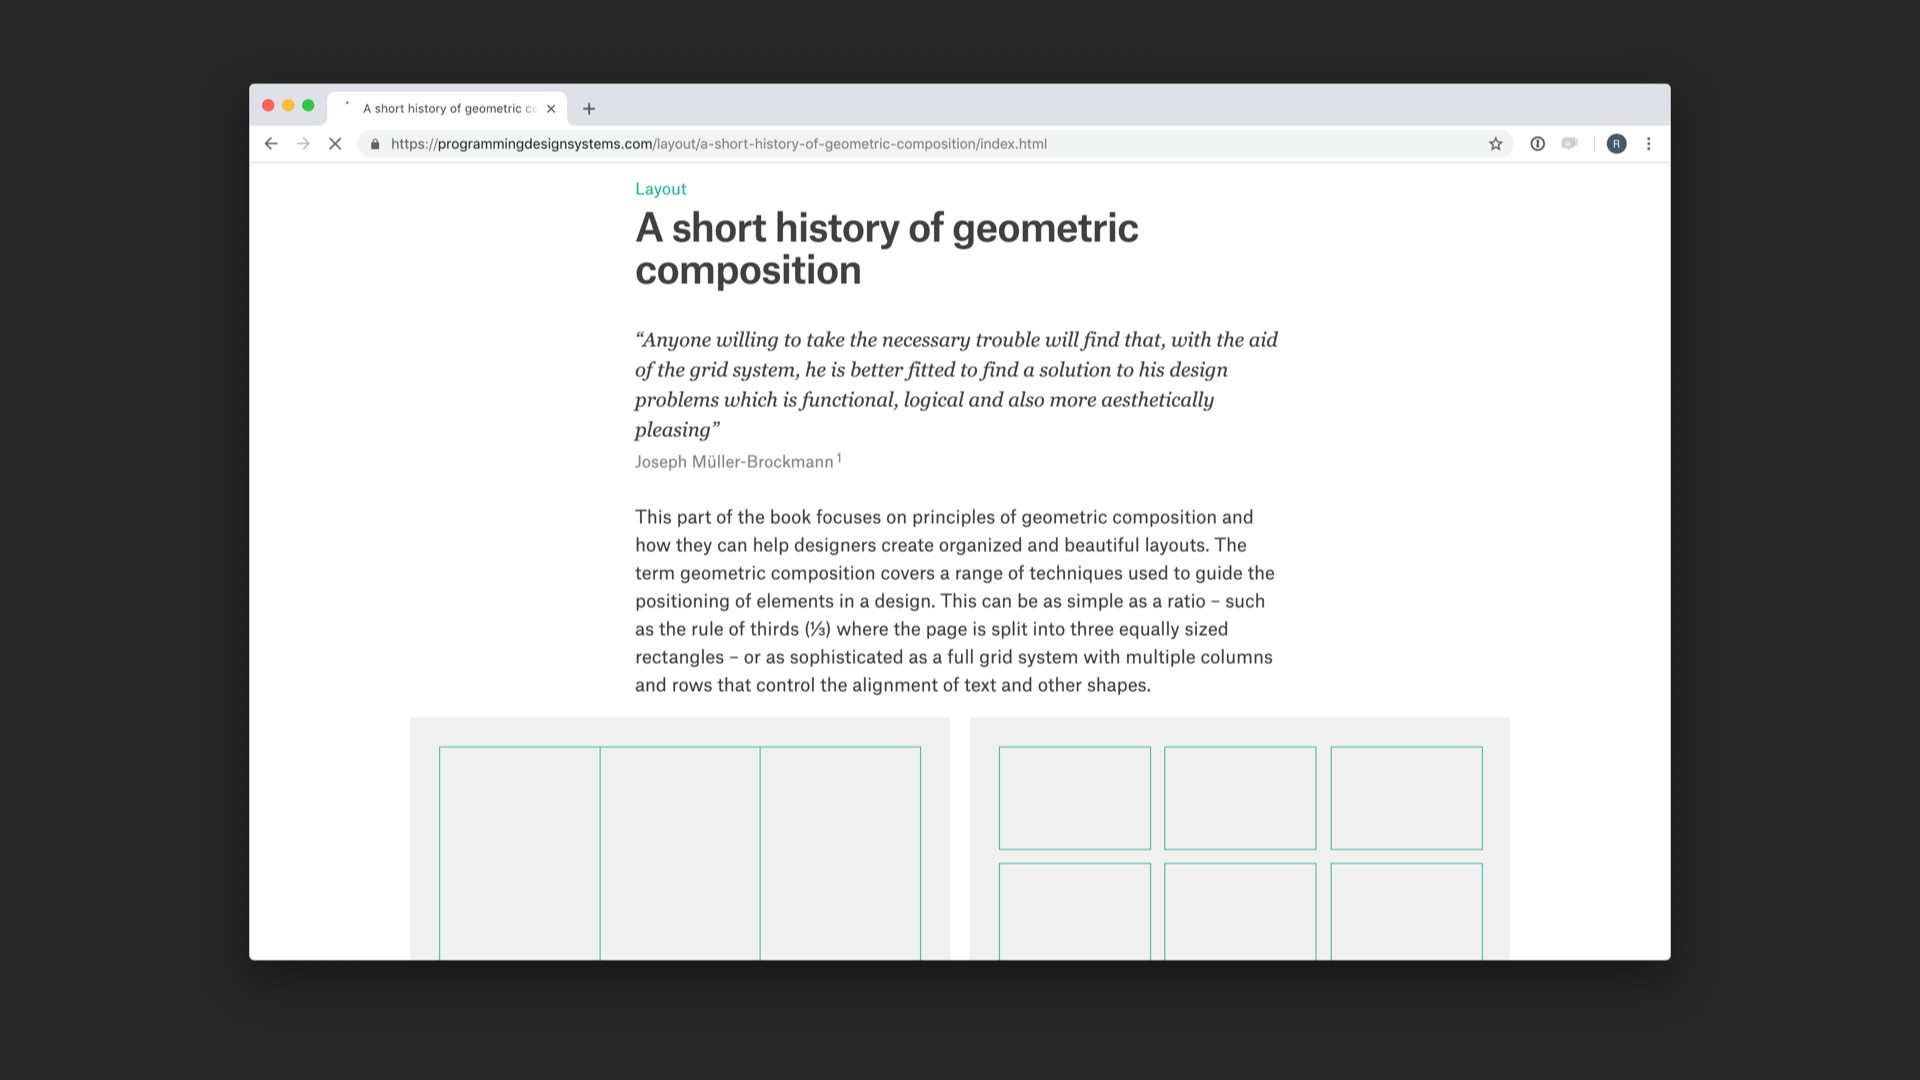 Screenshot of 'A short history of geometric composition' chapter of referenced website.